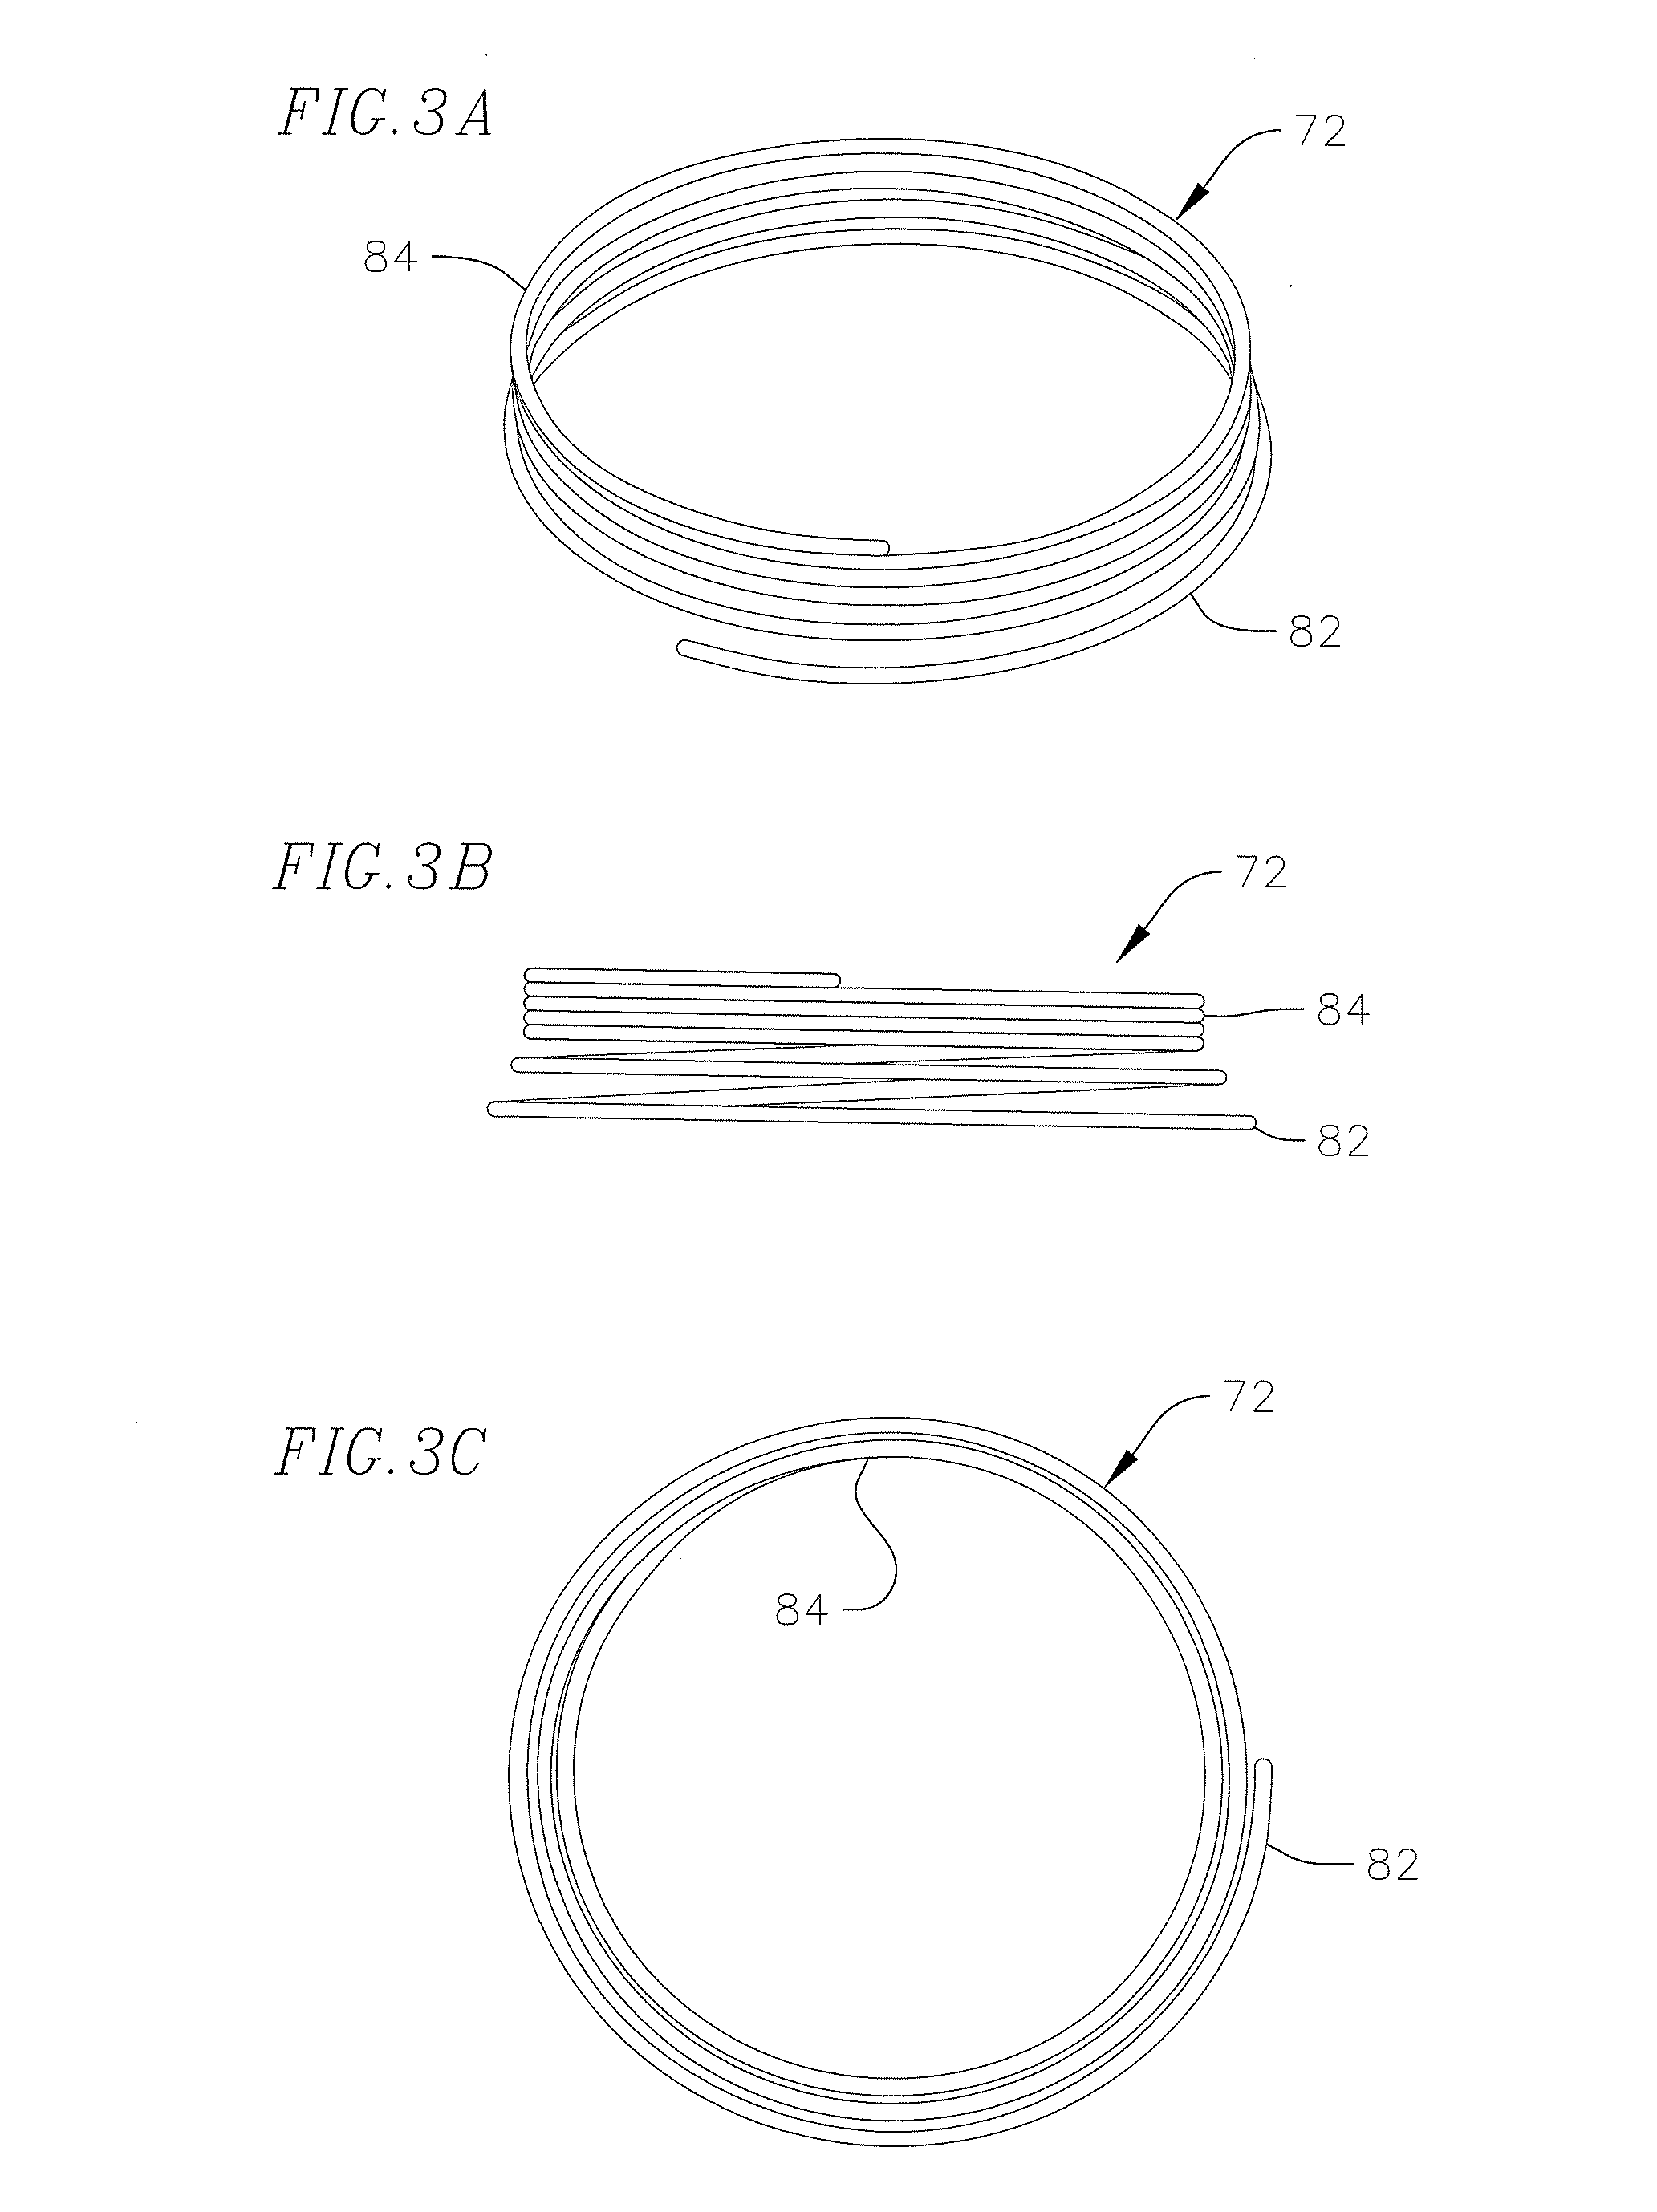 Coiled anchor for supporting prosthetic heart valve, prosthetic heart valve, and deployment device